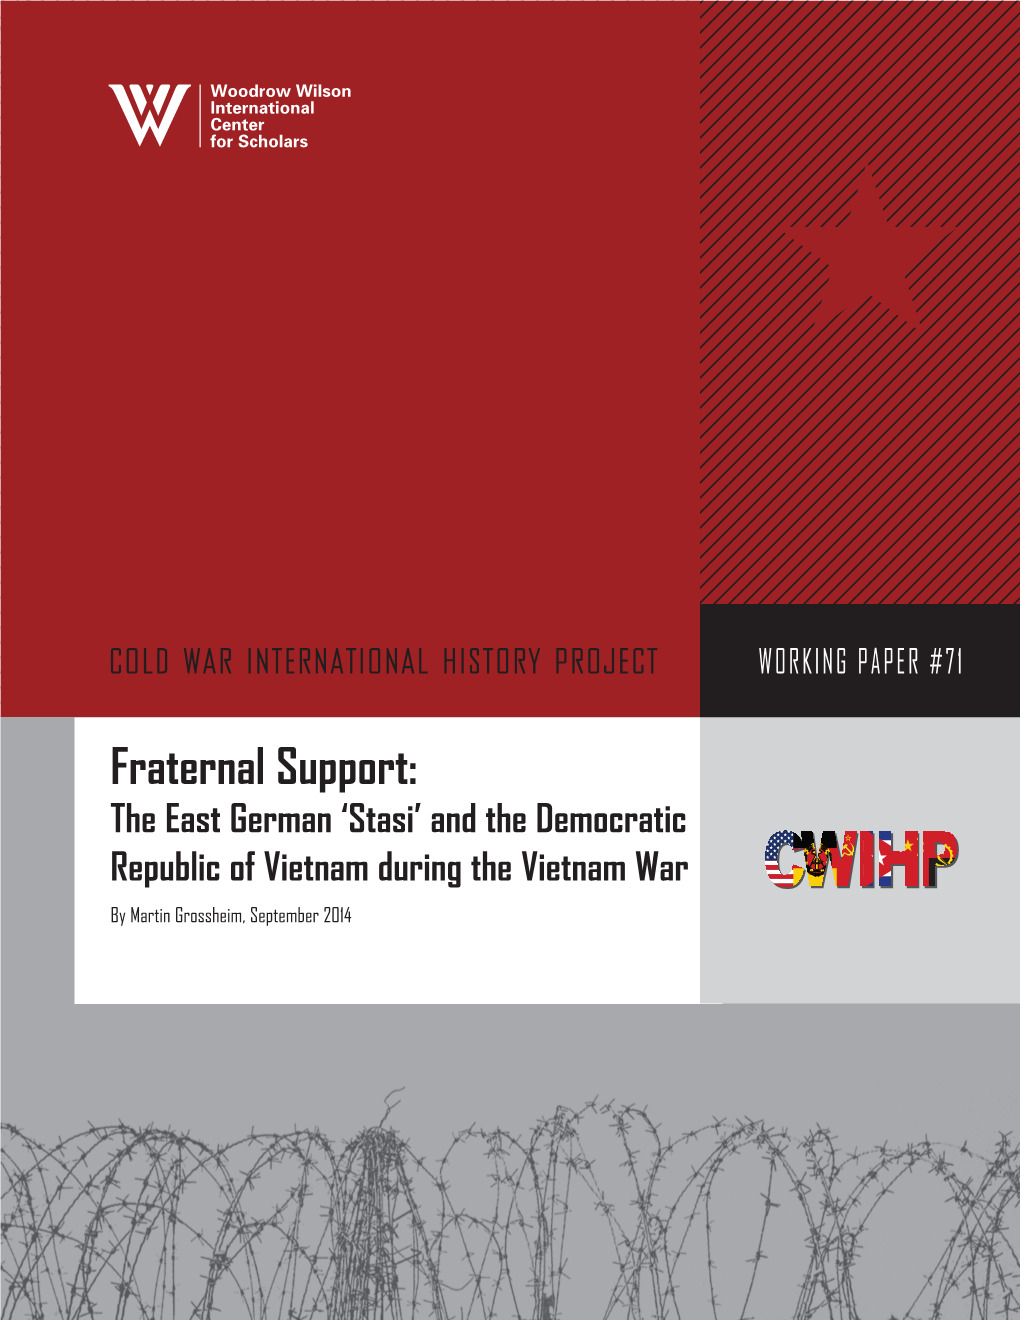 Fraternal Support: the East German 'Stasi' and The